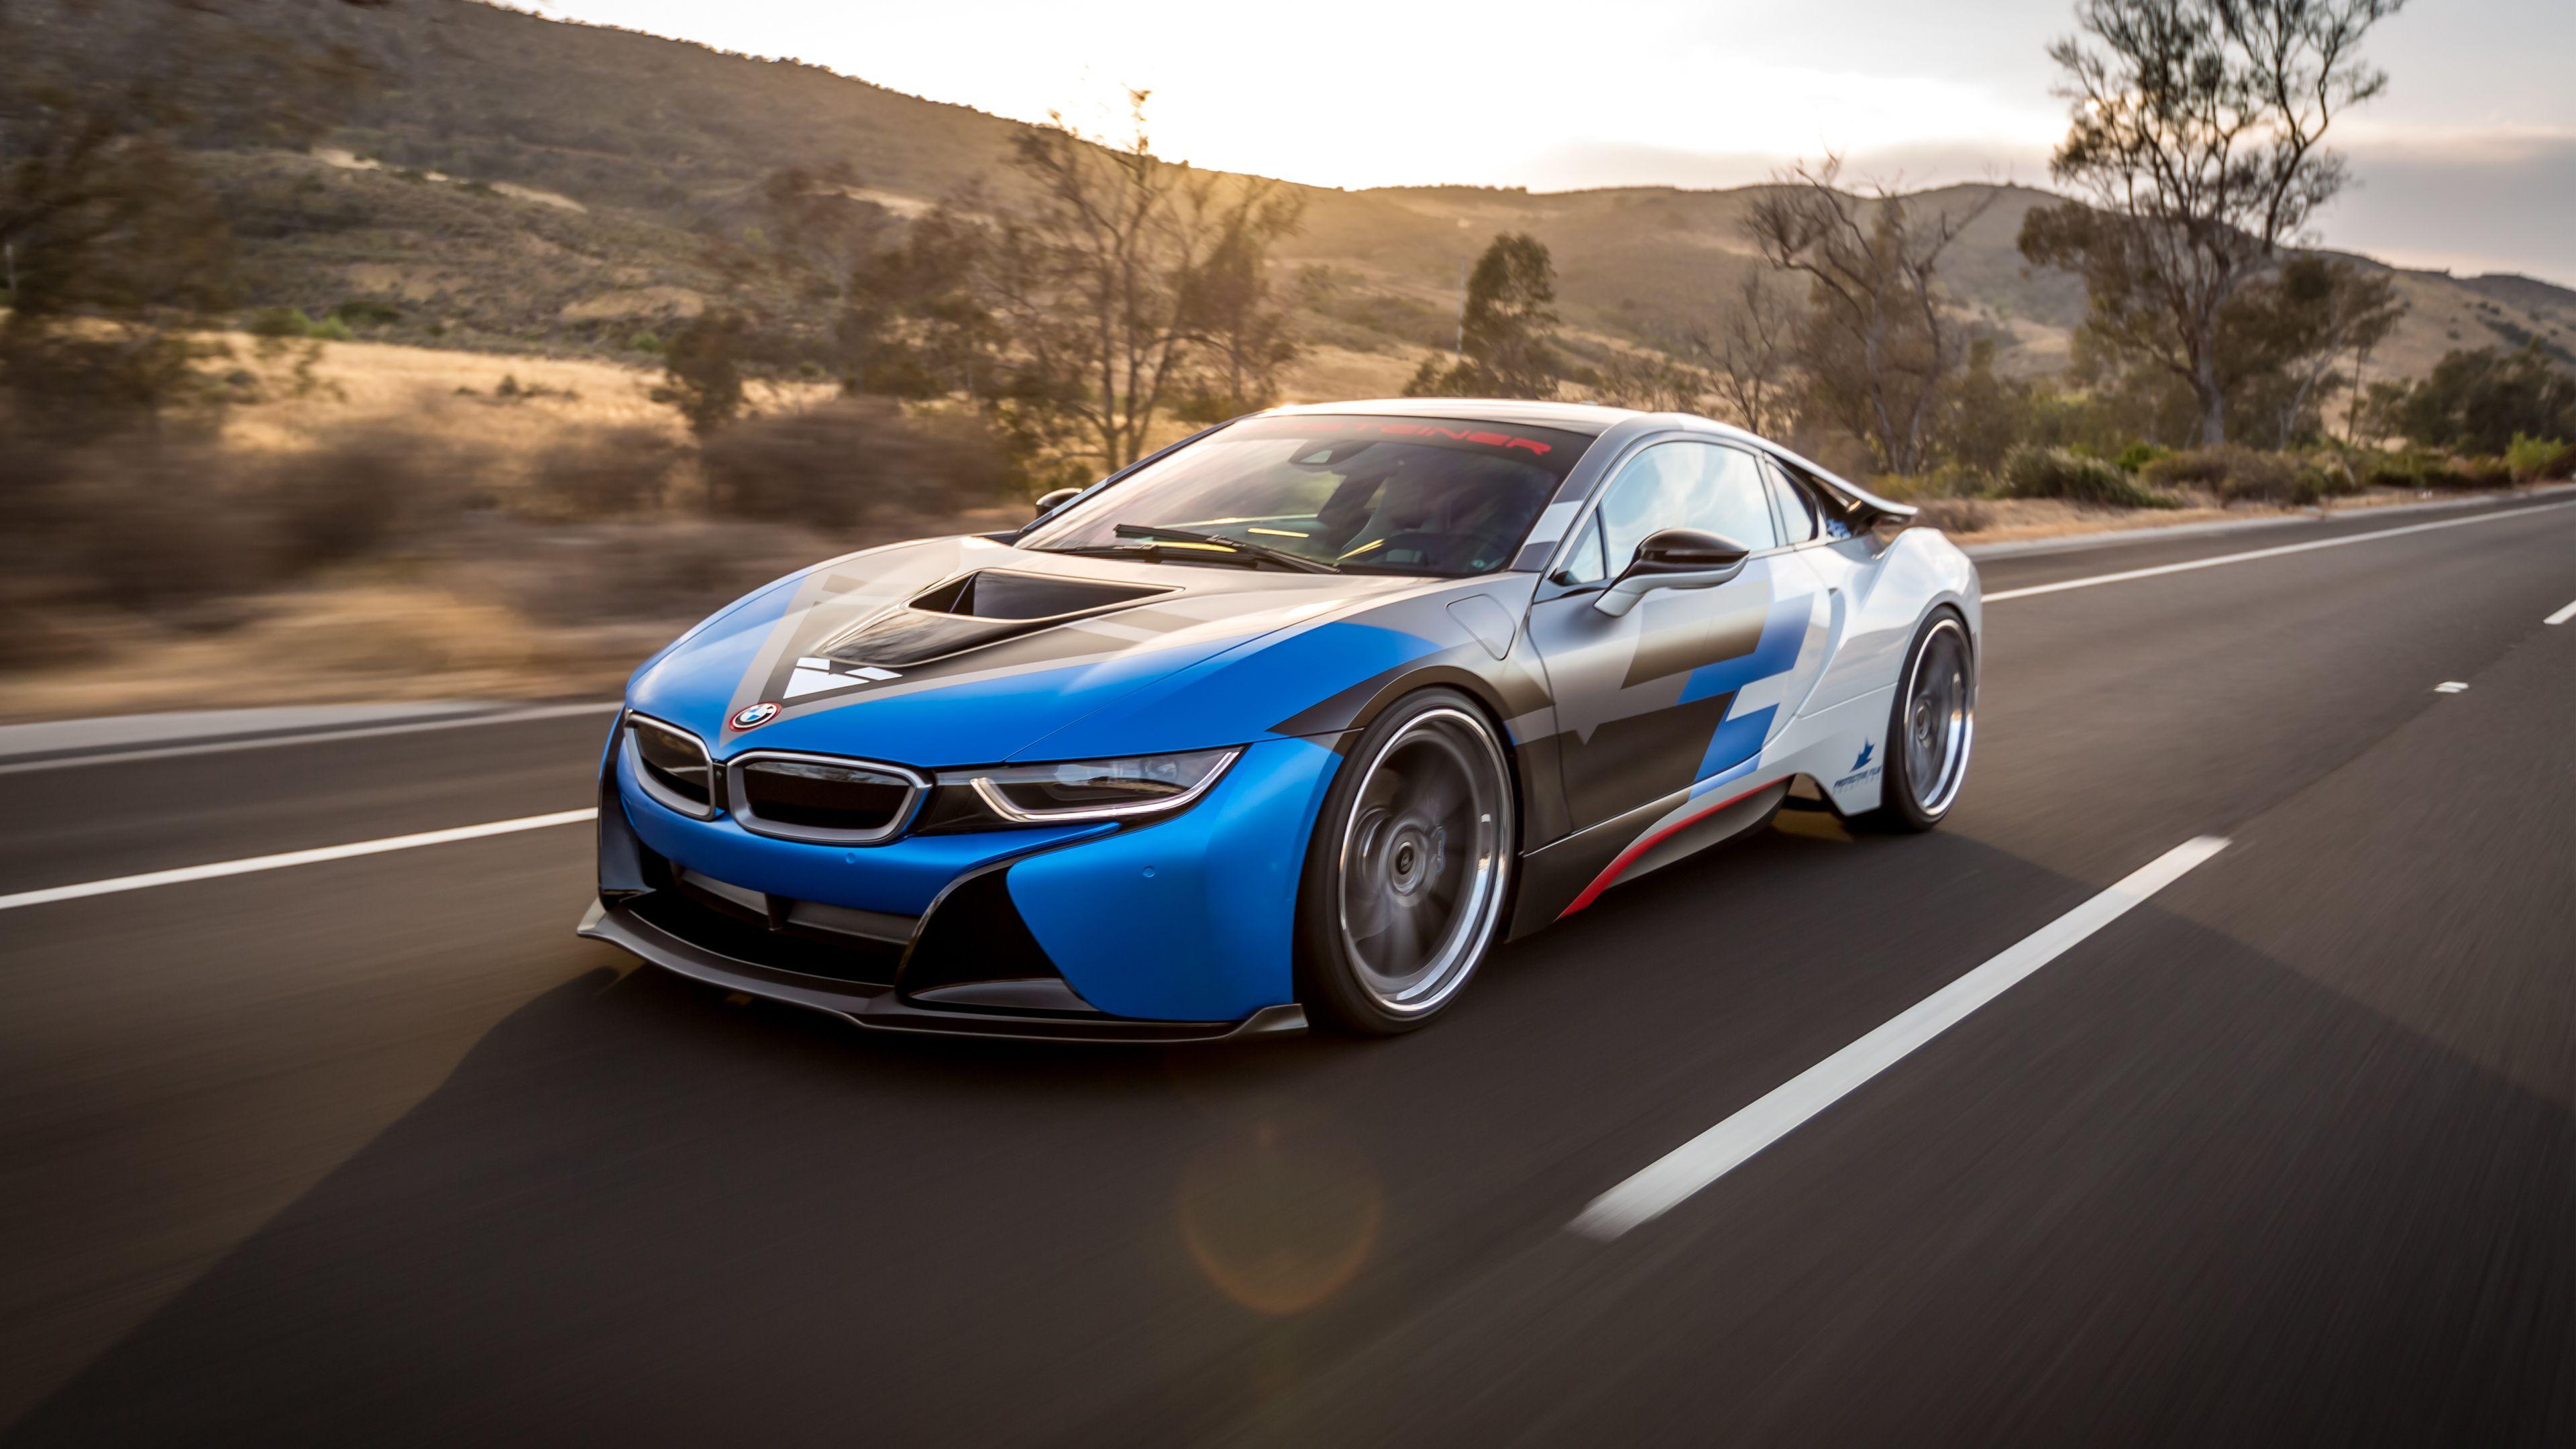 BMW i8 4K Wallpapers - Top Free BMW i8 4K Backgrounds - WallpaperAccess